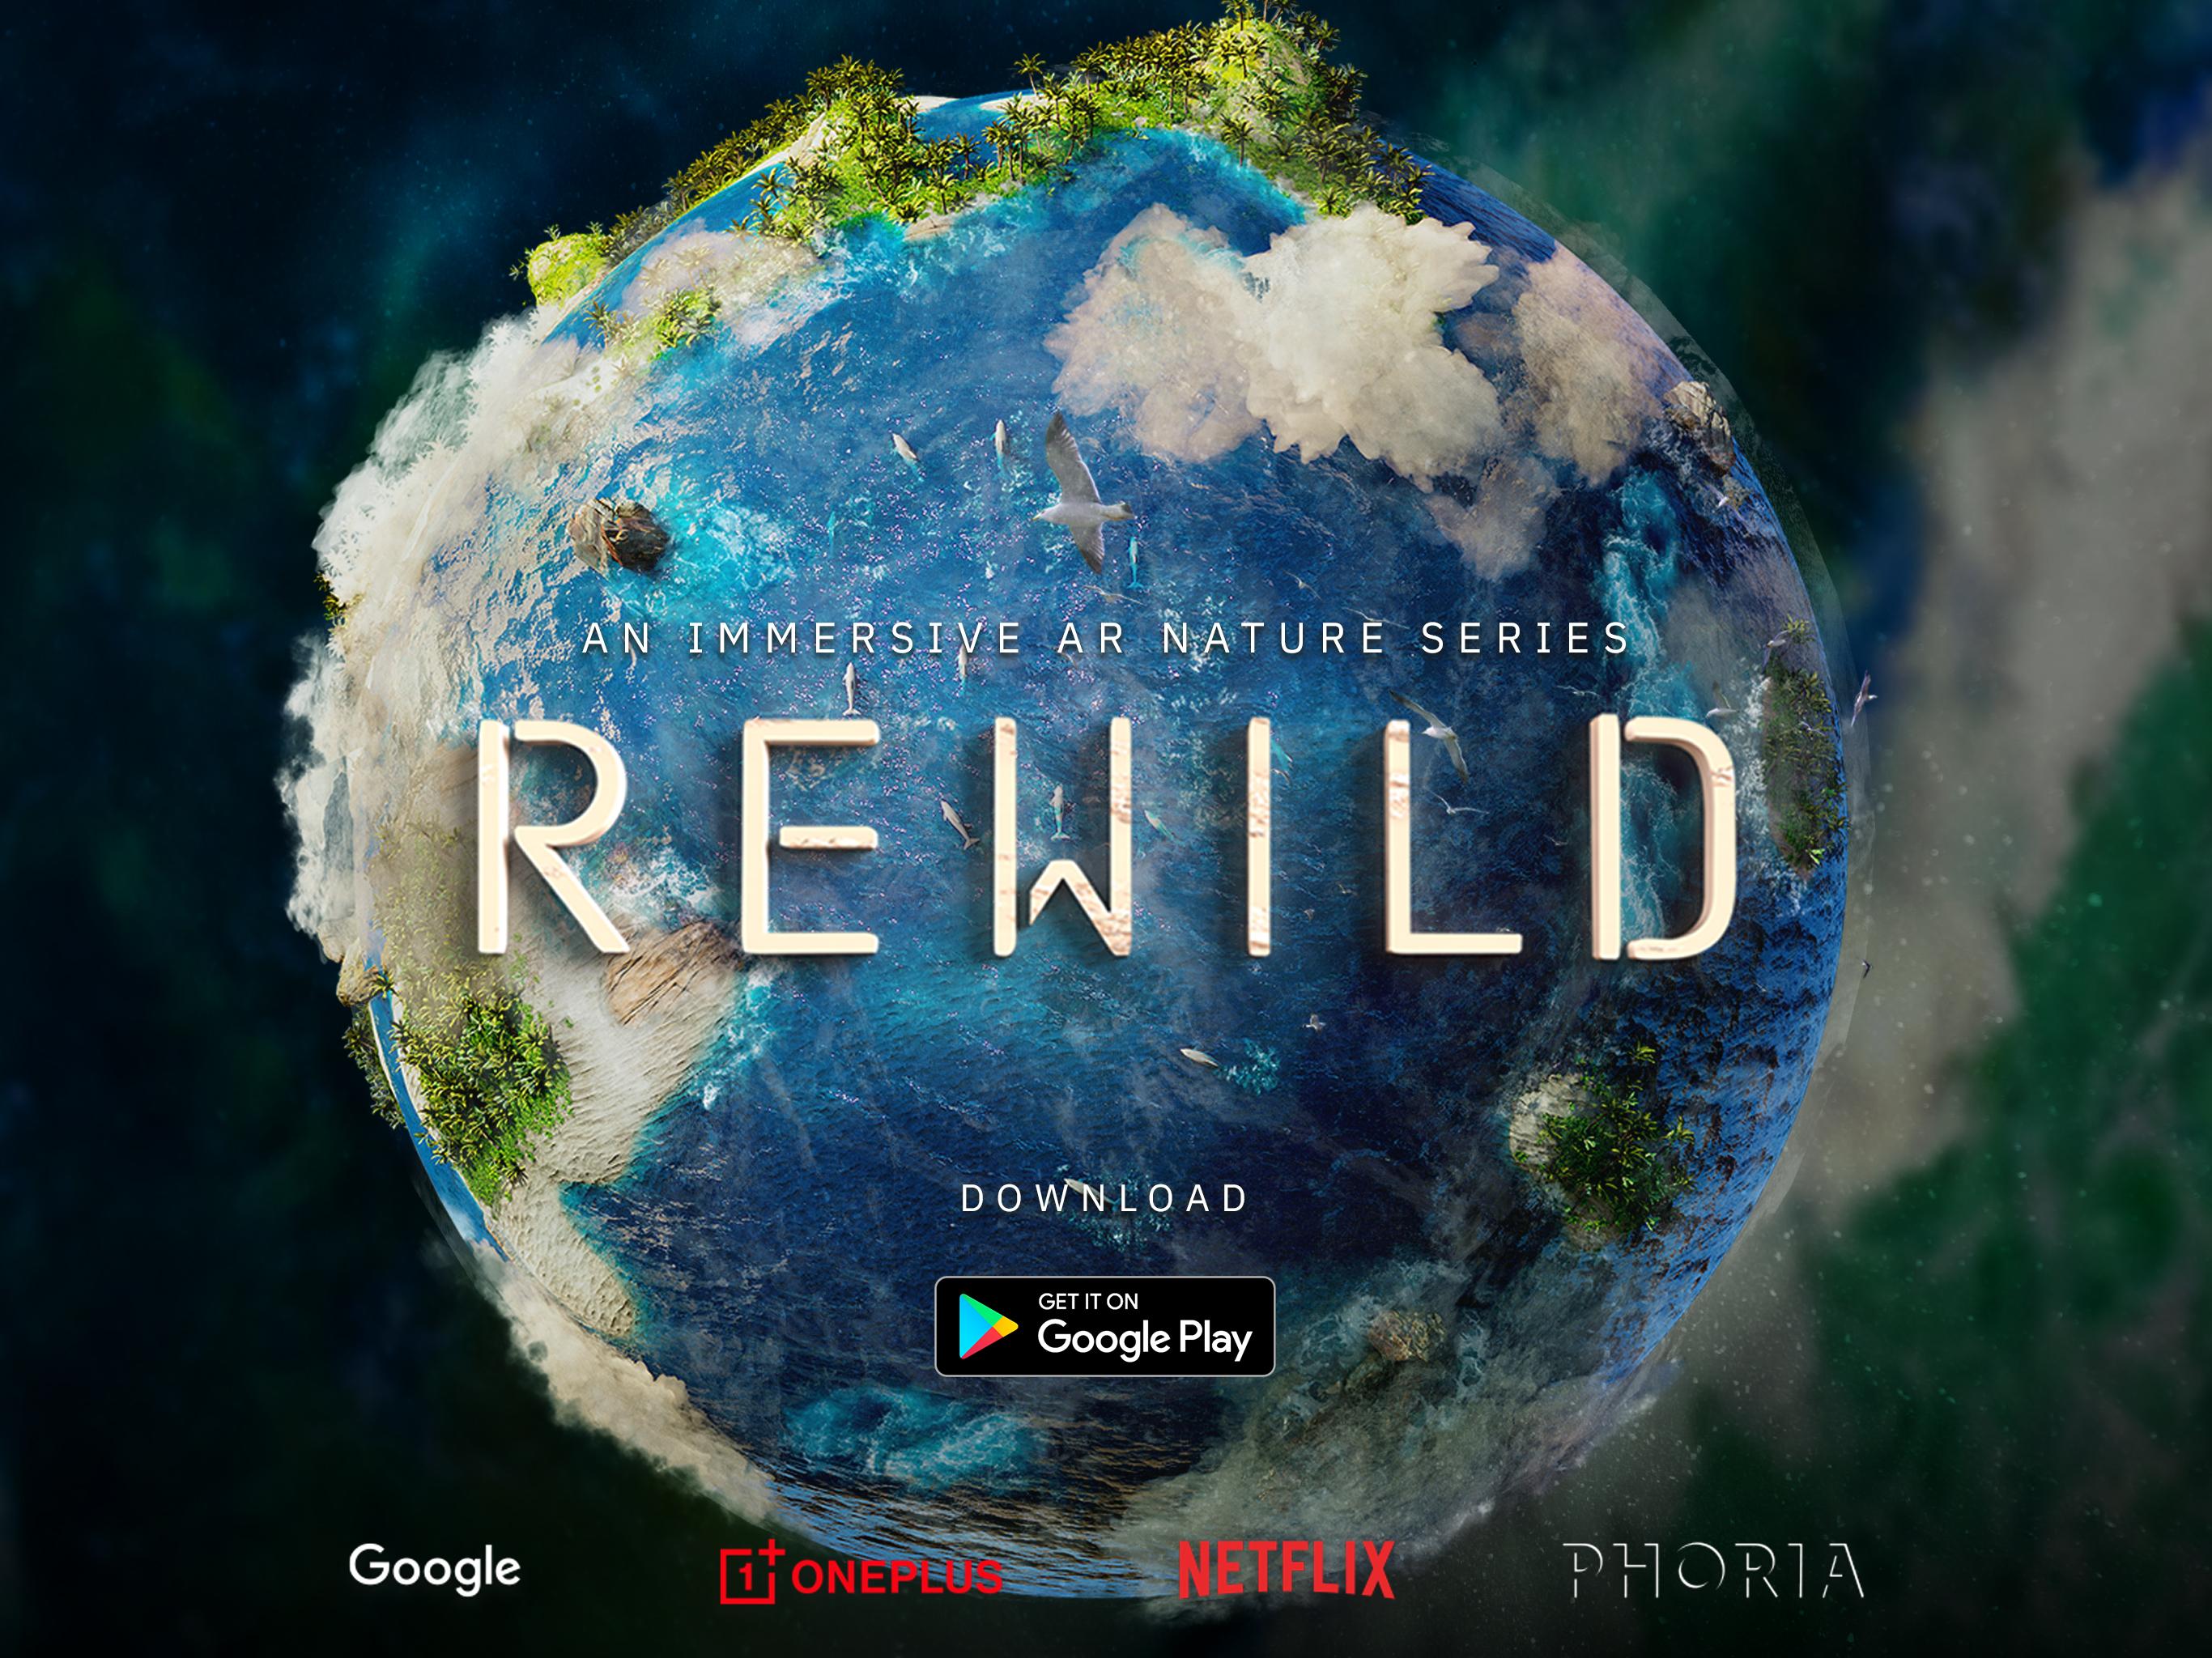 REWILD - Immersive AR Nature Series for Android - APK Download